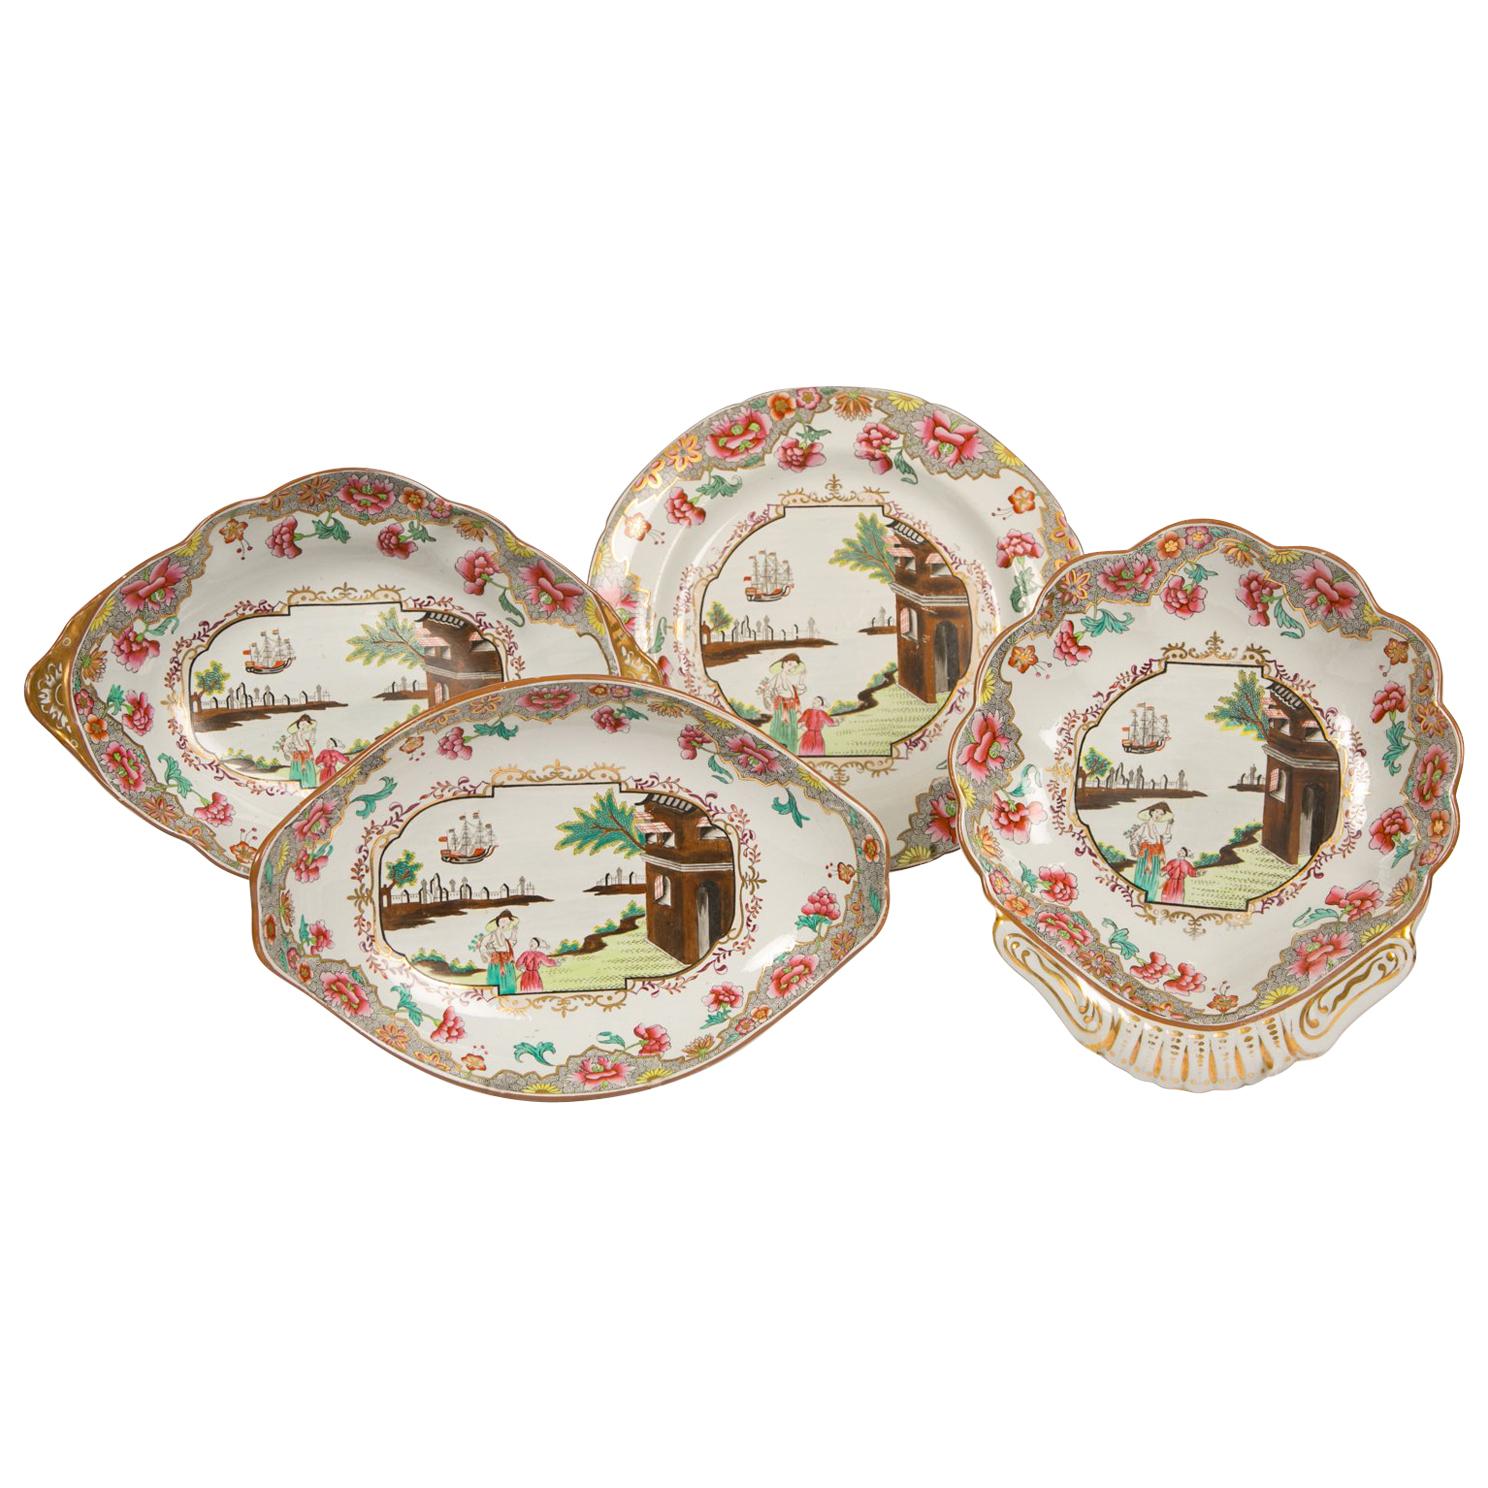 Antique Set of Eight Shaped Dishes in the Spode Mandarin Pattern circa 1820